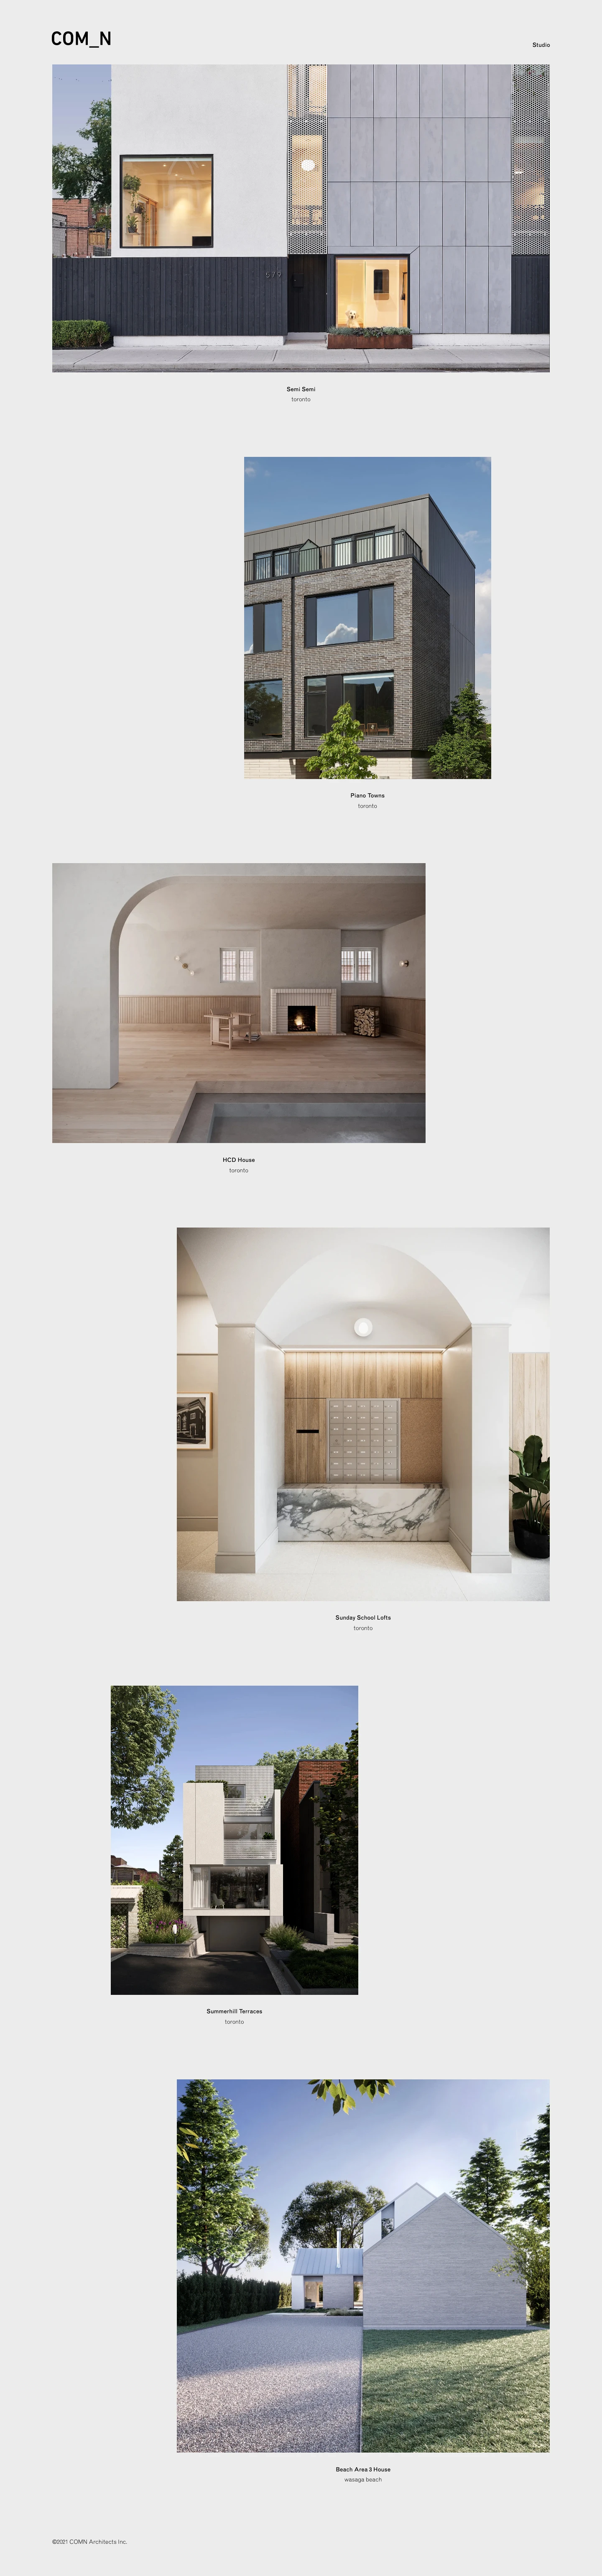 COMN Architects Landing Page Example: COMN Architects is an award winning design firm practicing architecture and interior design. Based in Toronto, the studio specializes in commercial and residential projects.